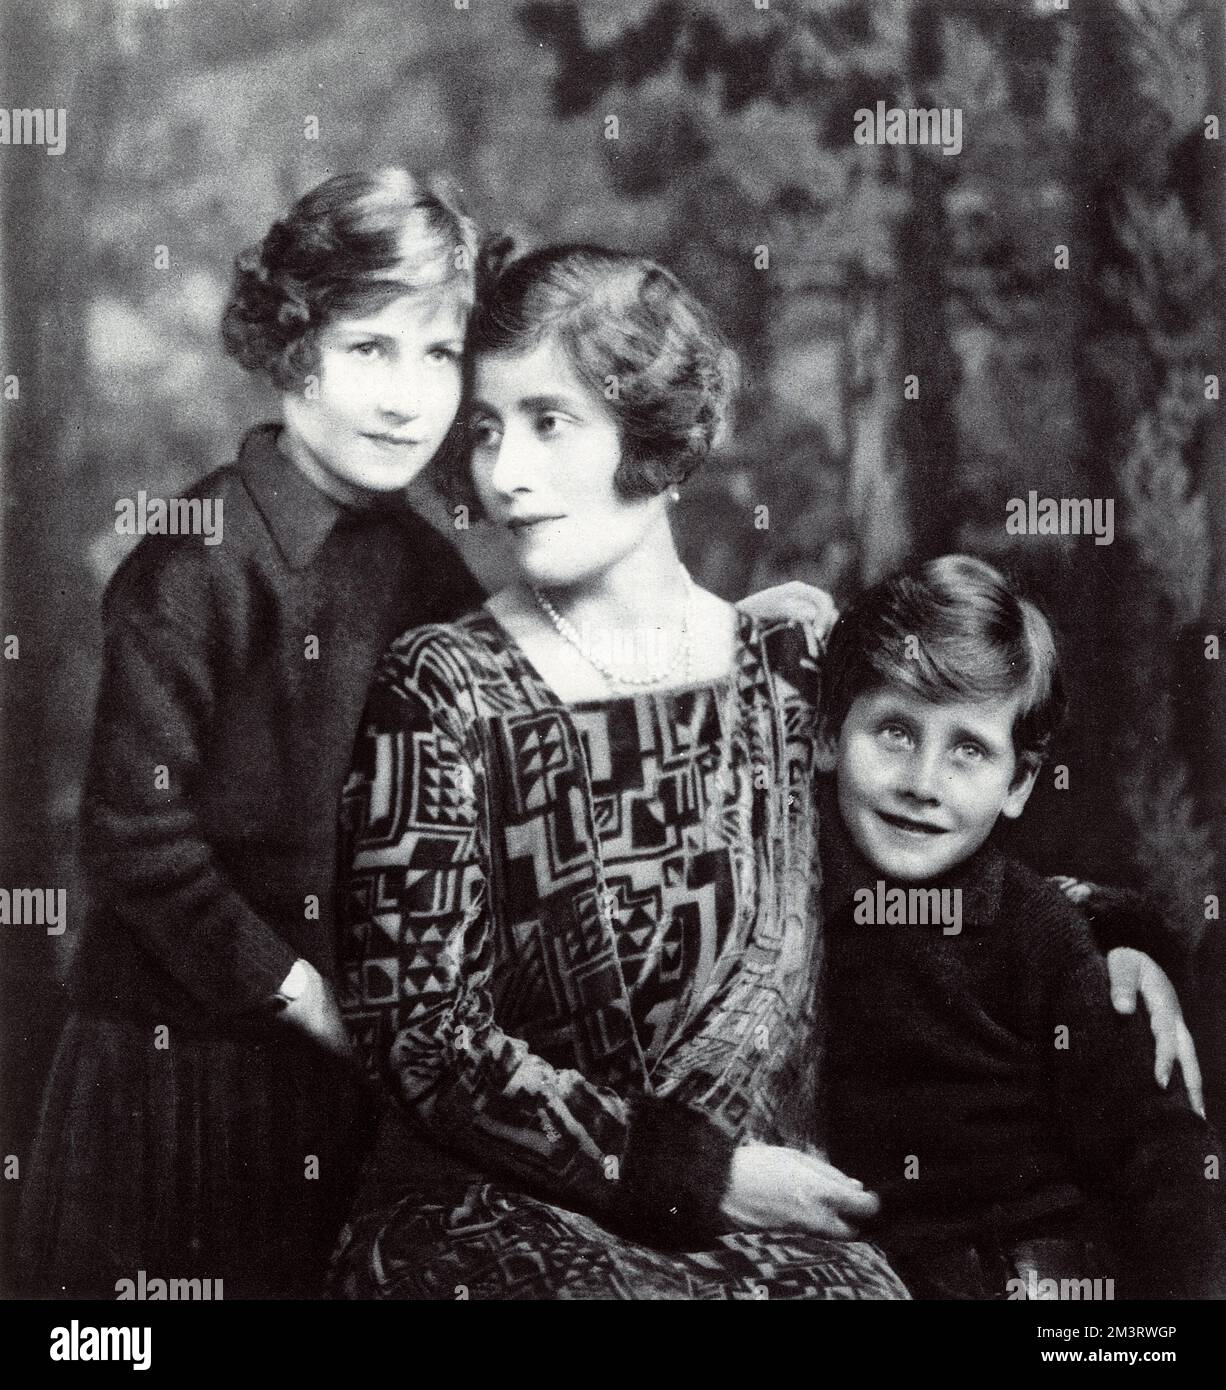 Lady Rosemary Leveson-Gower, the sister of H.R.H. The Duchess of York, with her two children, Granville and Mary. She was the second daughter of the Earl and Countess of Strathmore and the wife of Captain the Hon. William Spencer Leveson-Gower.     Date: 1927 Stock Photo